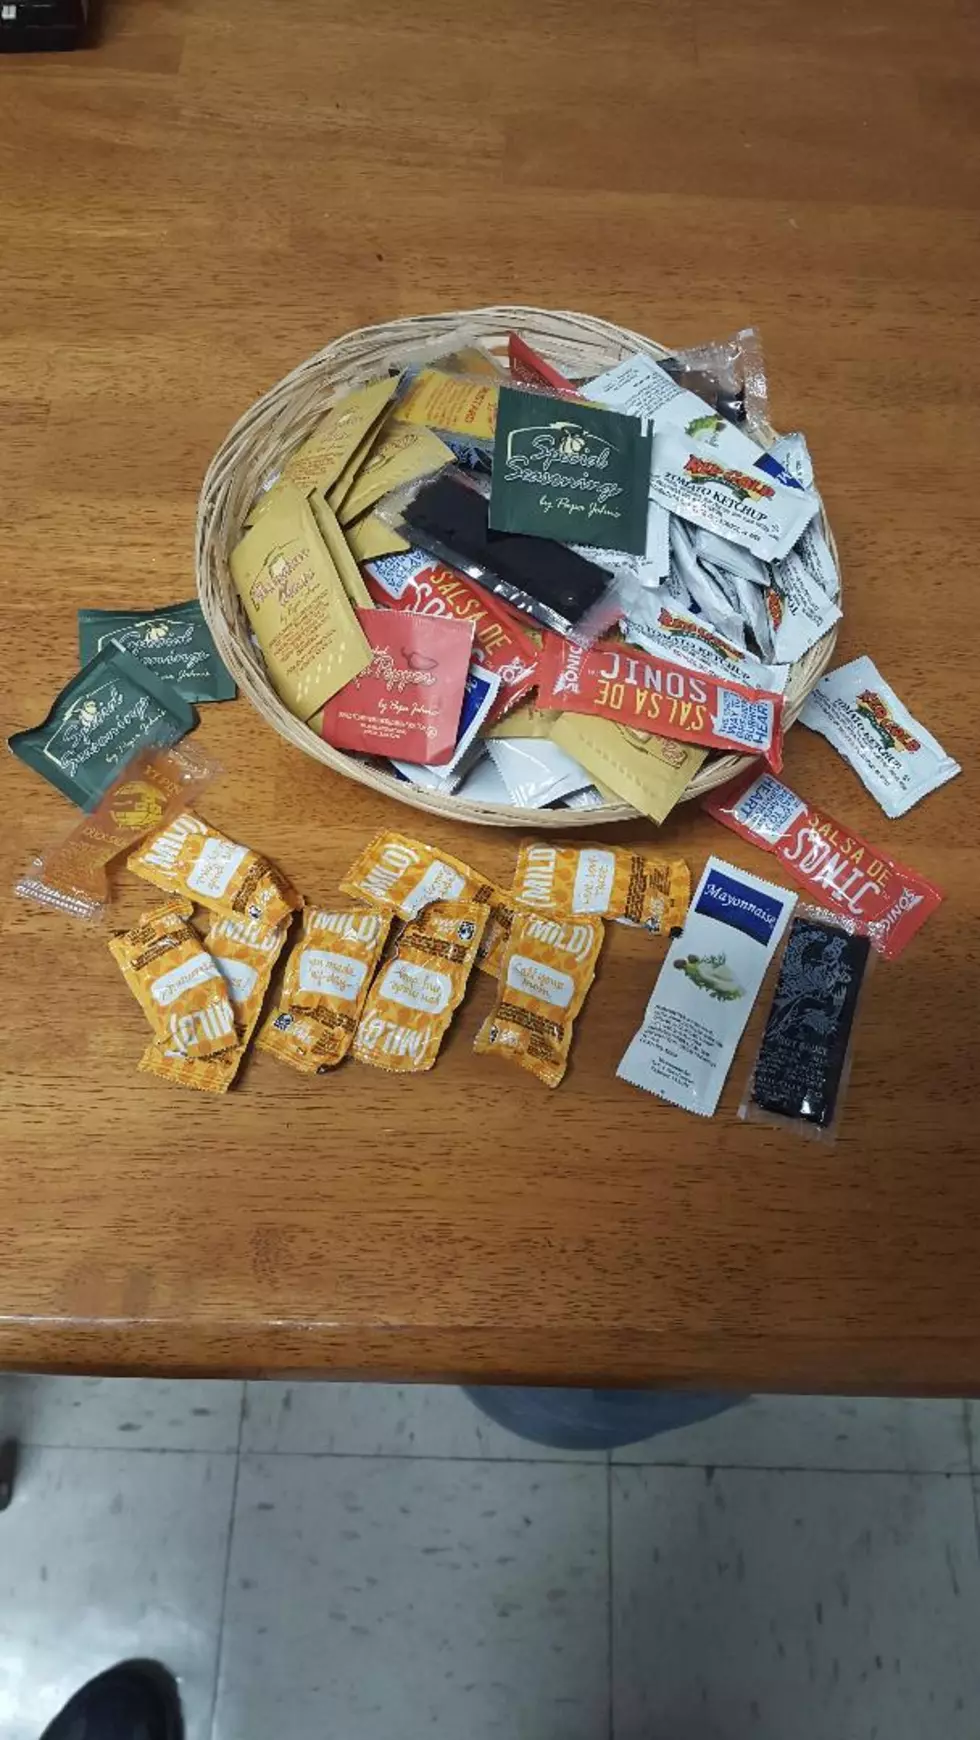 How Many Different Condiment Packages Are You Hoarding?